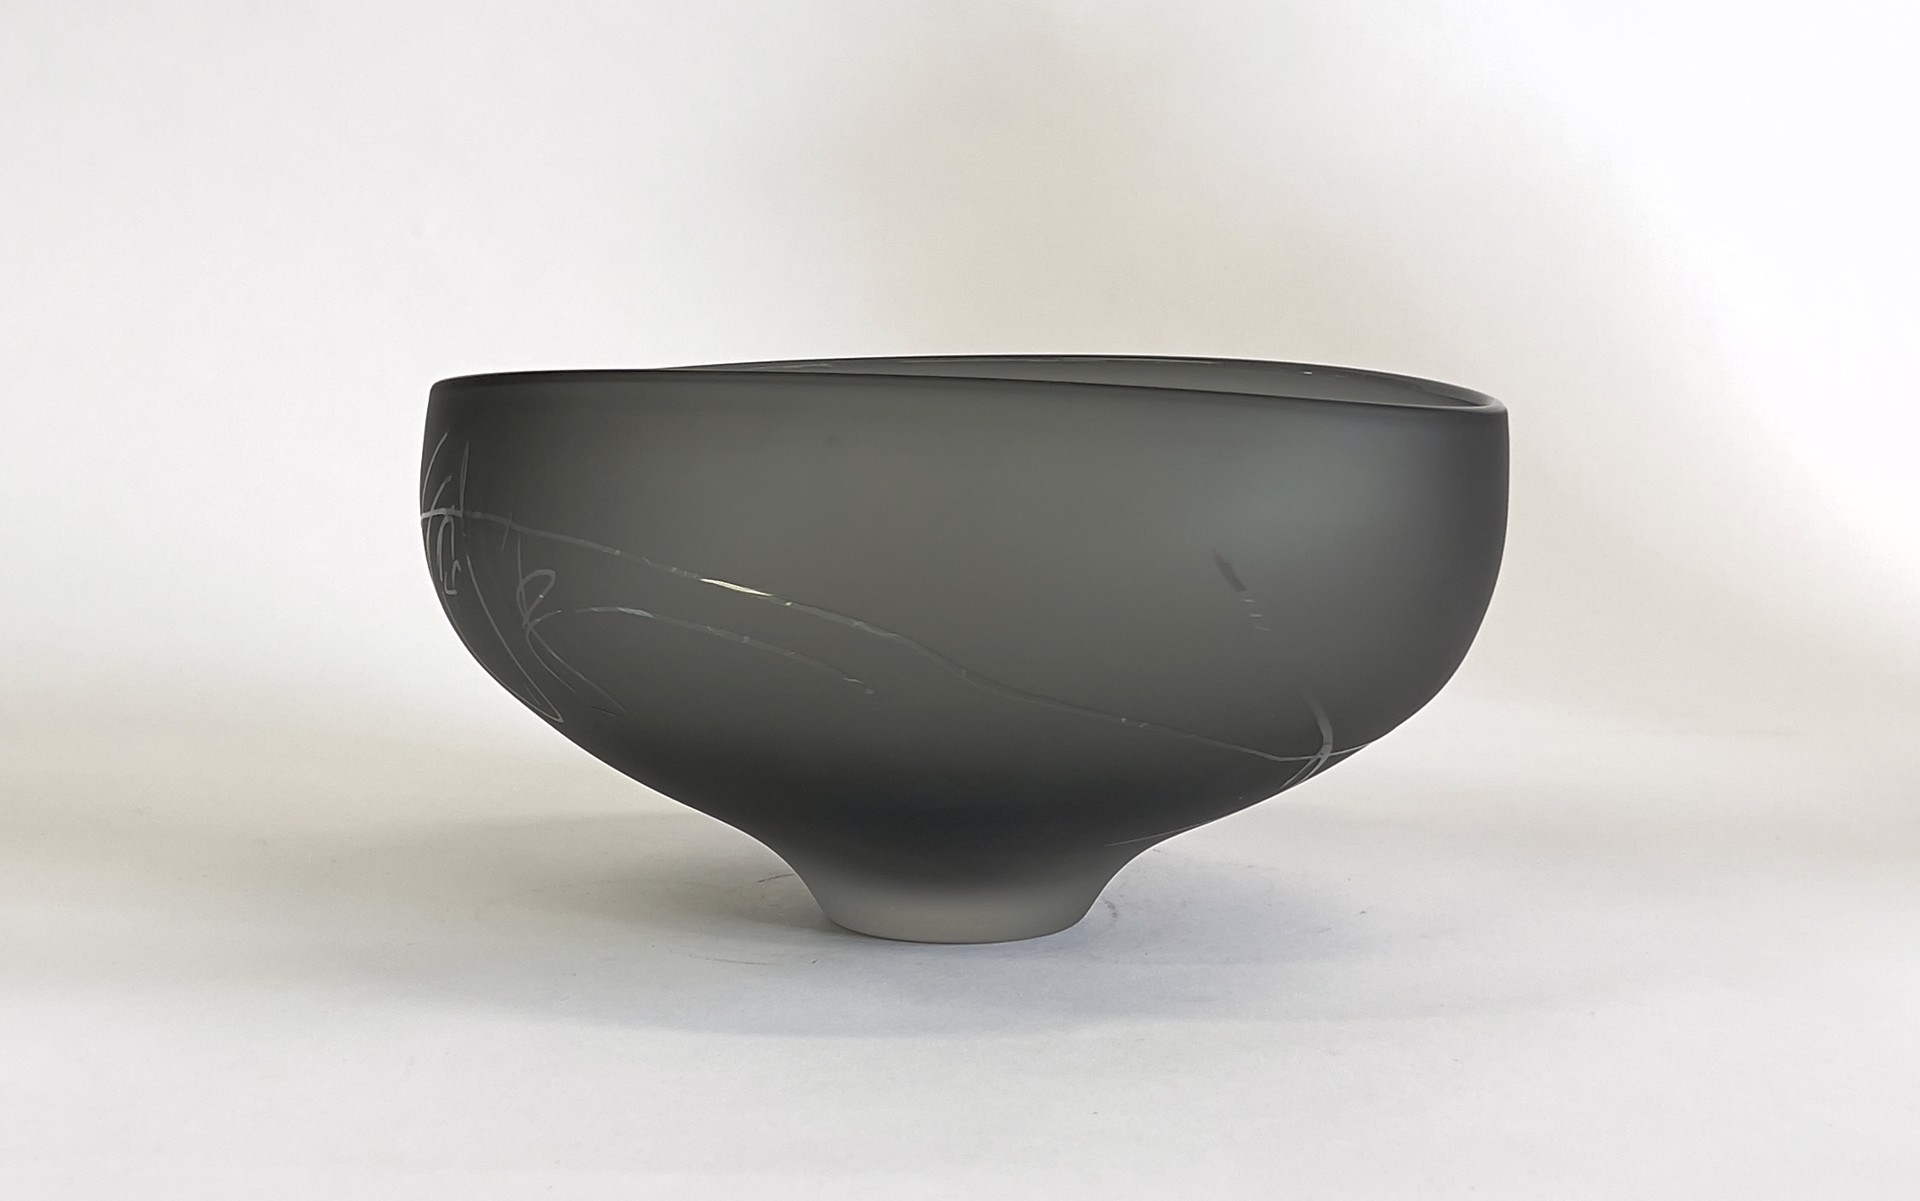 The Goodman Studios Neutral Grey Scribe Bowl is striking glass sculpture with a sandblasted surface, featuring intricate clear markings and a elegant grey hue. The abstract design invites contemplation and appreciation of the interplay between light, shadow, and form.